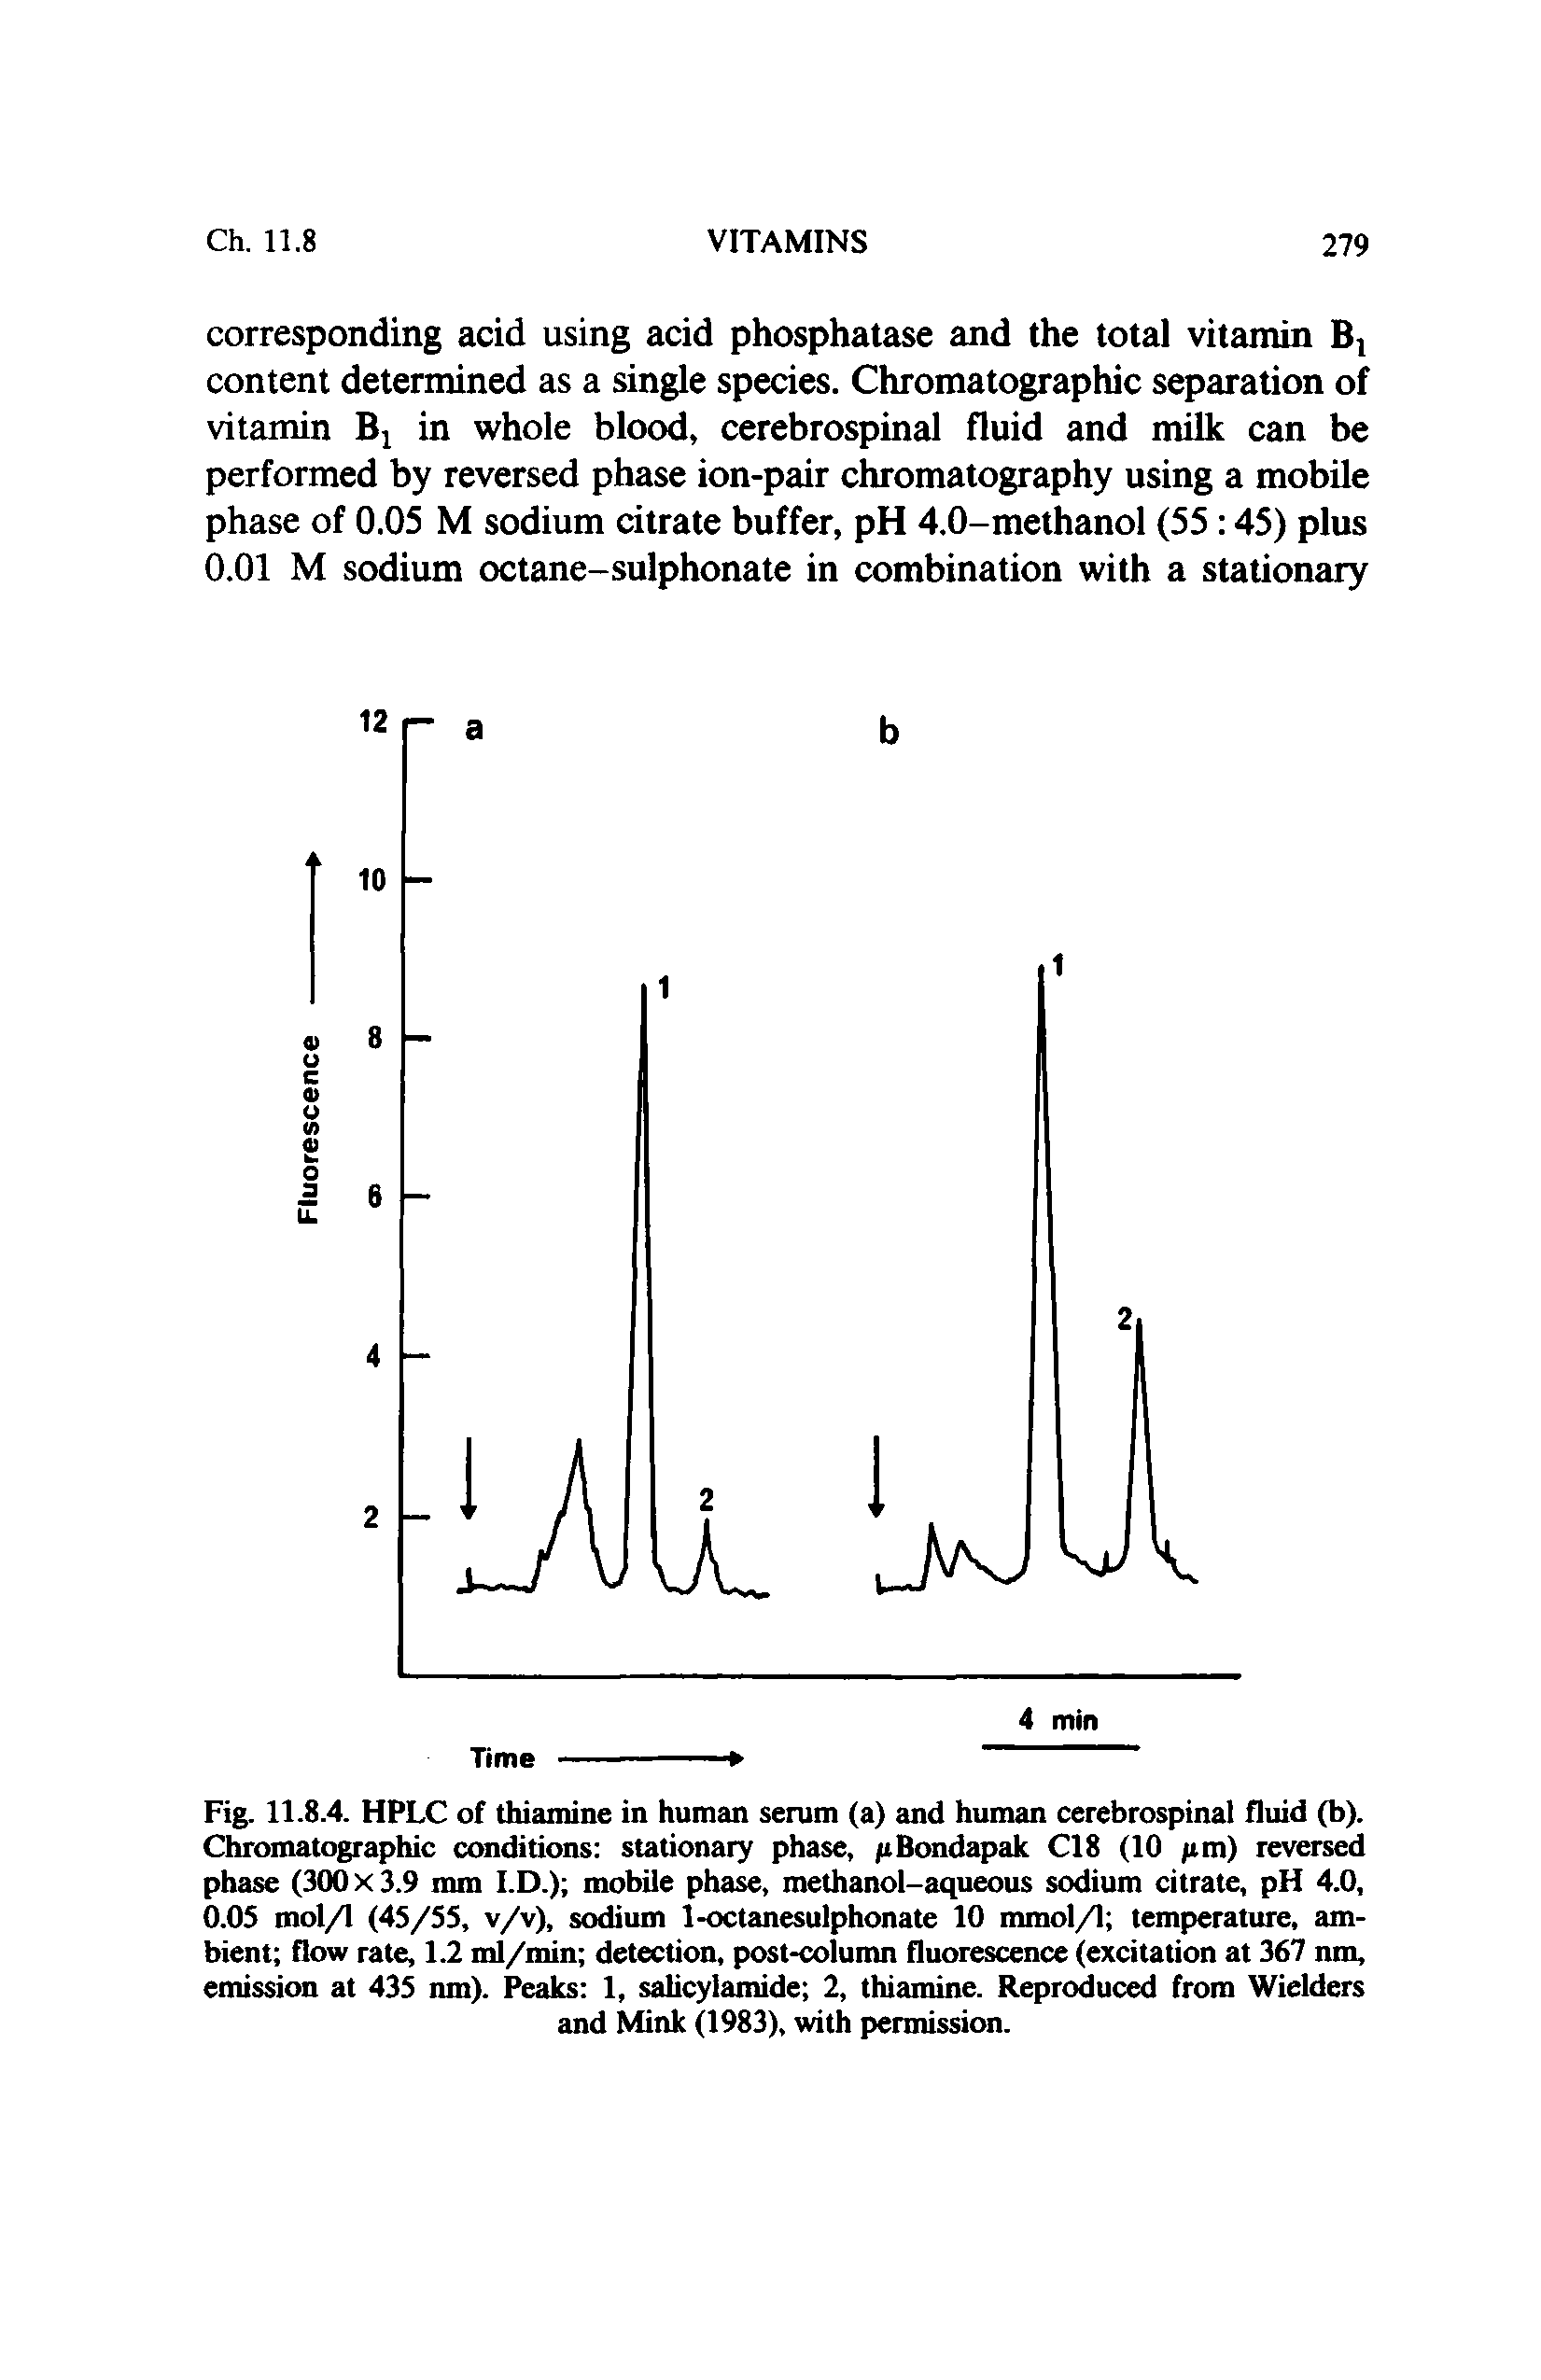 Fig. 11.8.4. HPLC of thiamine in human serum (a) and human cerebrospinal fluid (b). Chromatographic conditions stationary phase, pBondapak C18 (10 pm) reversed phase (300 X 3.9 mm I.D.) mobile phase, methanol-aqueous sodium citrate, pH 4.0, 0.05 mol/1 (45/55, v/v), sodium 1-octanesulphonate 10 mmol/1 temperature, ambient flow rate, 1.2 ml/min detection, post-column fluorescence (excitation at 367 nm, emission at 435 nm). Peaks 1, saUcylamide 2, thiamine. Reproduced from Wielders and Mink (1983), with permission.